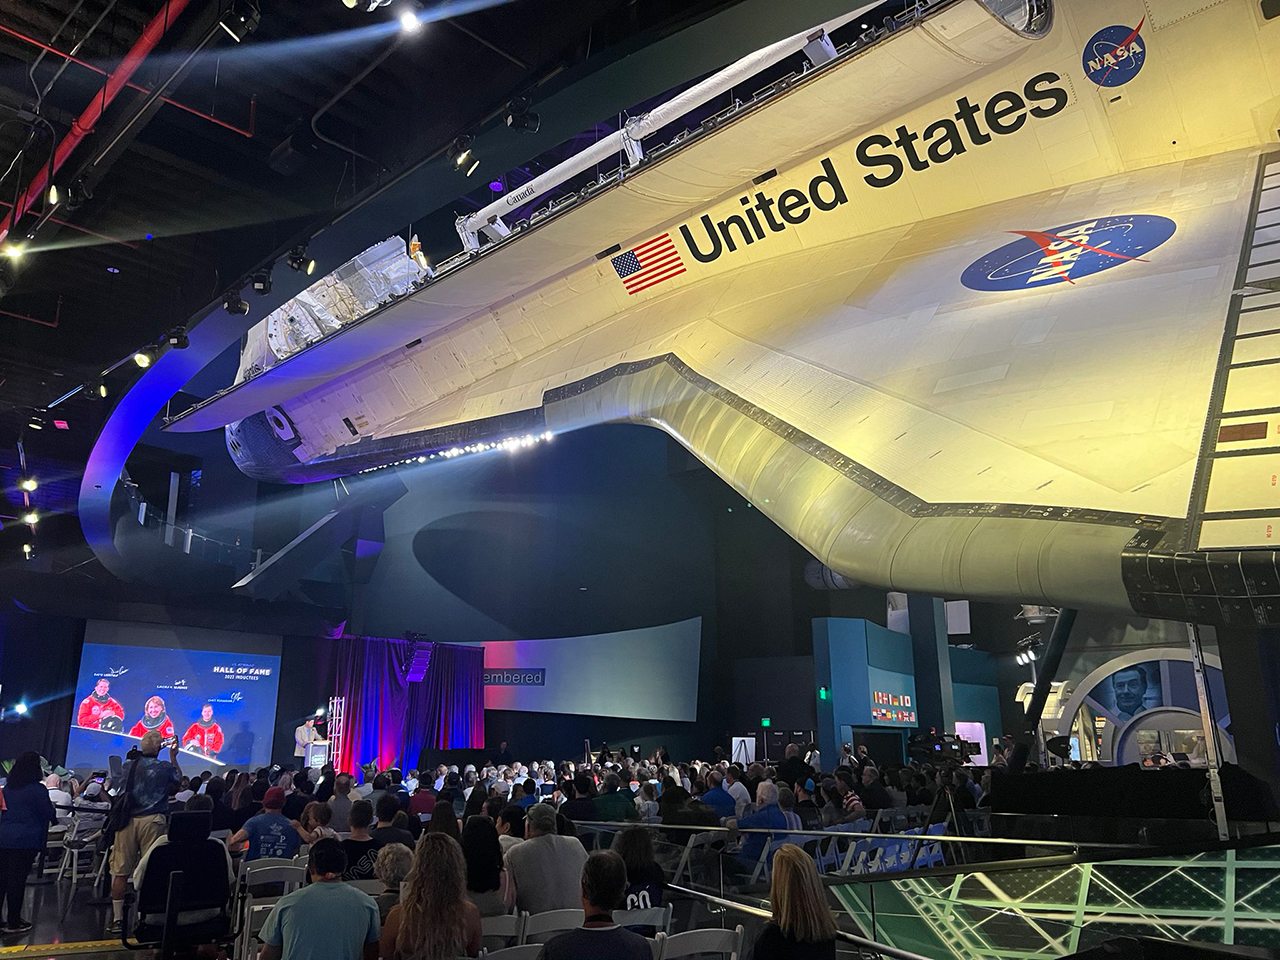 The 2022 U.S. Astronaut Hall of Fame induction ceremony was held under the display of the space shuttle Atlantis, a spacecraft on which all three inductees flew, at the Kennedy Space Center Visitor Complex in Florida.